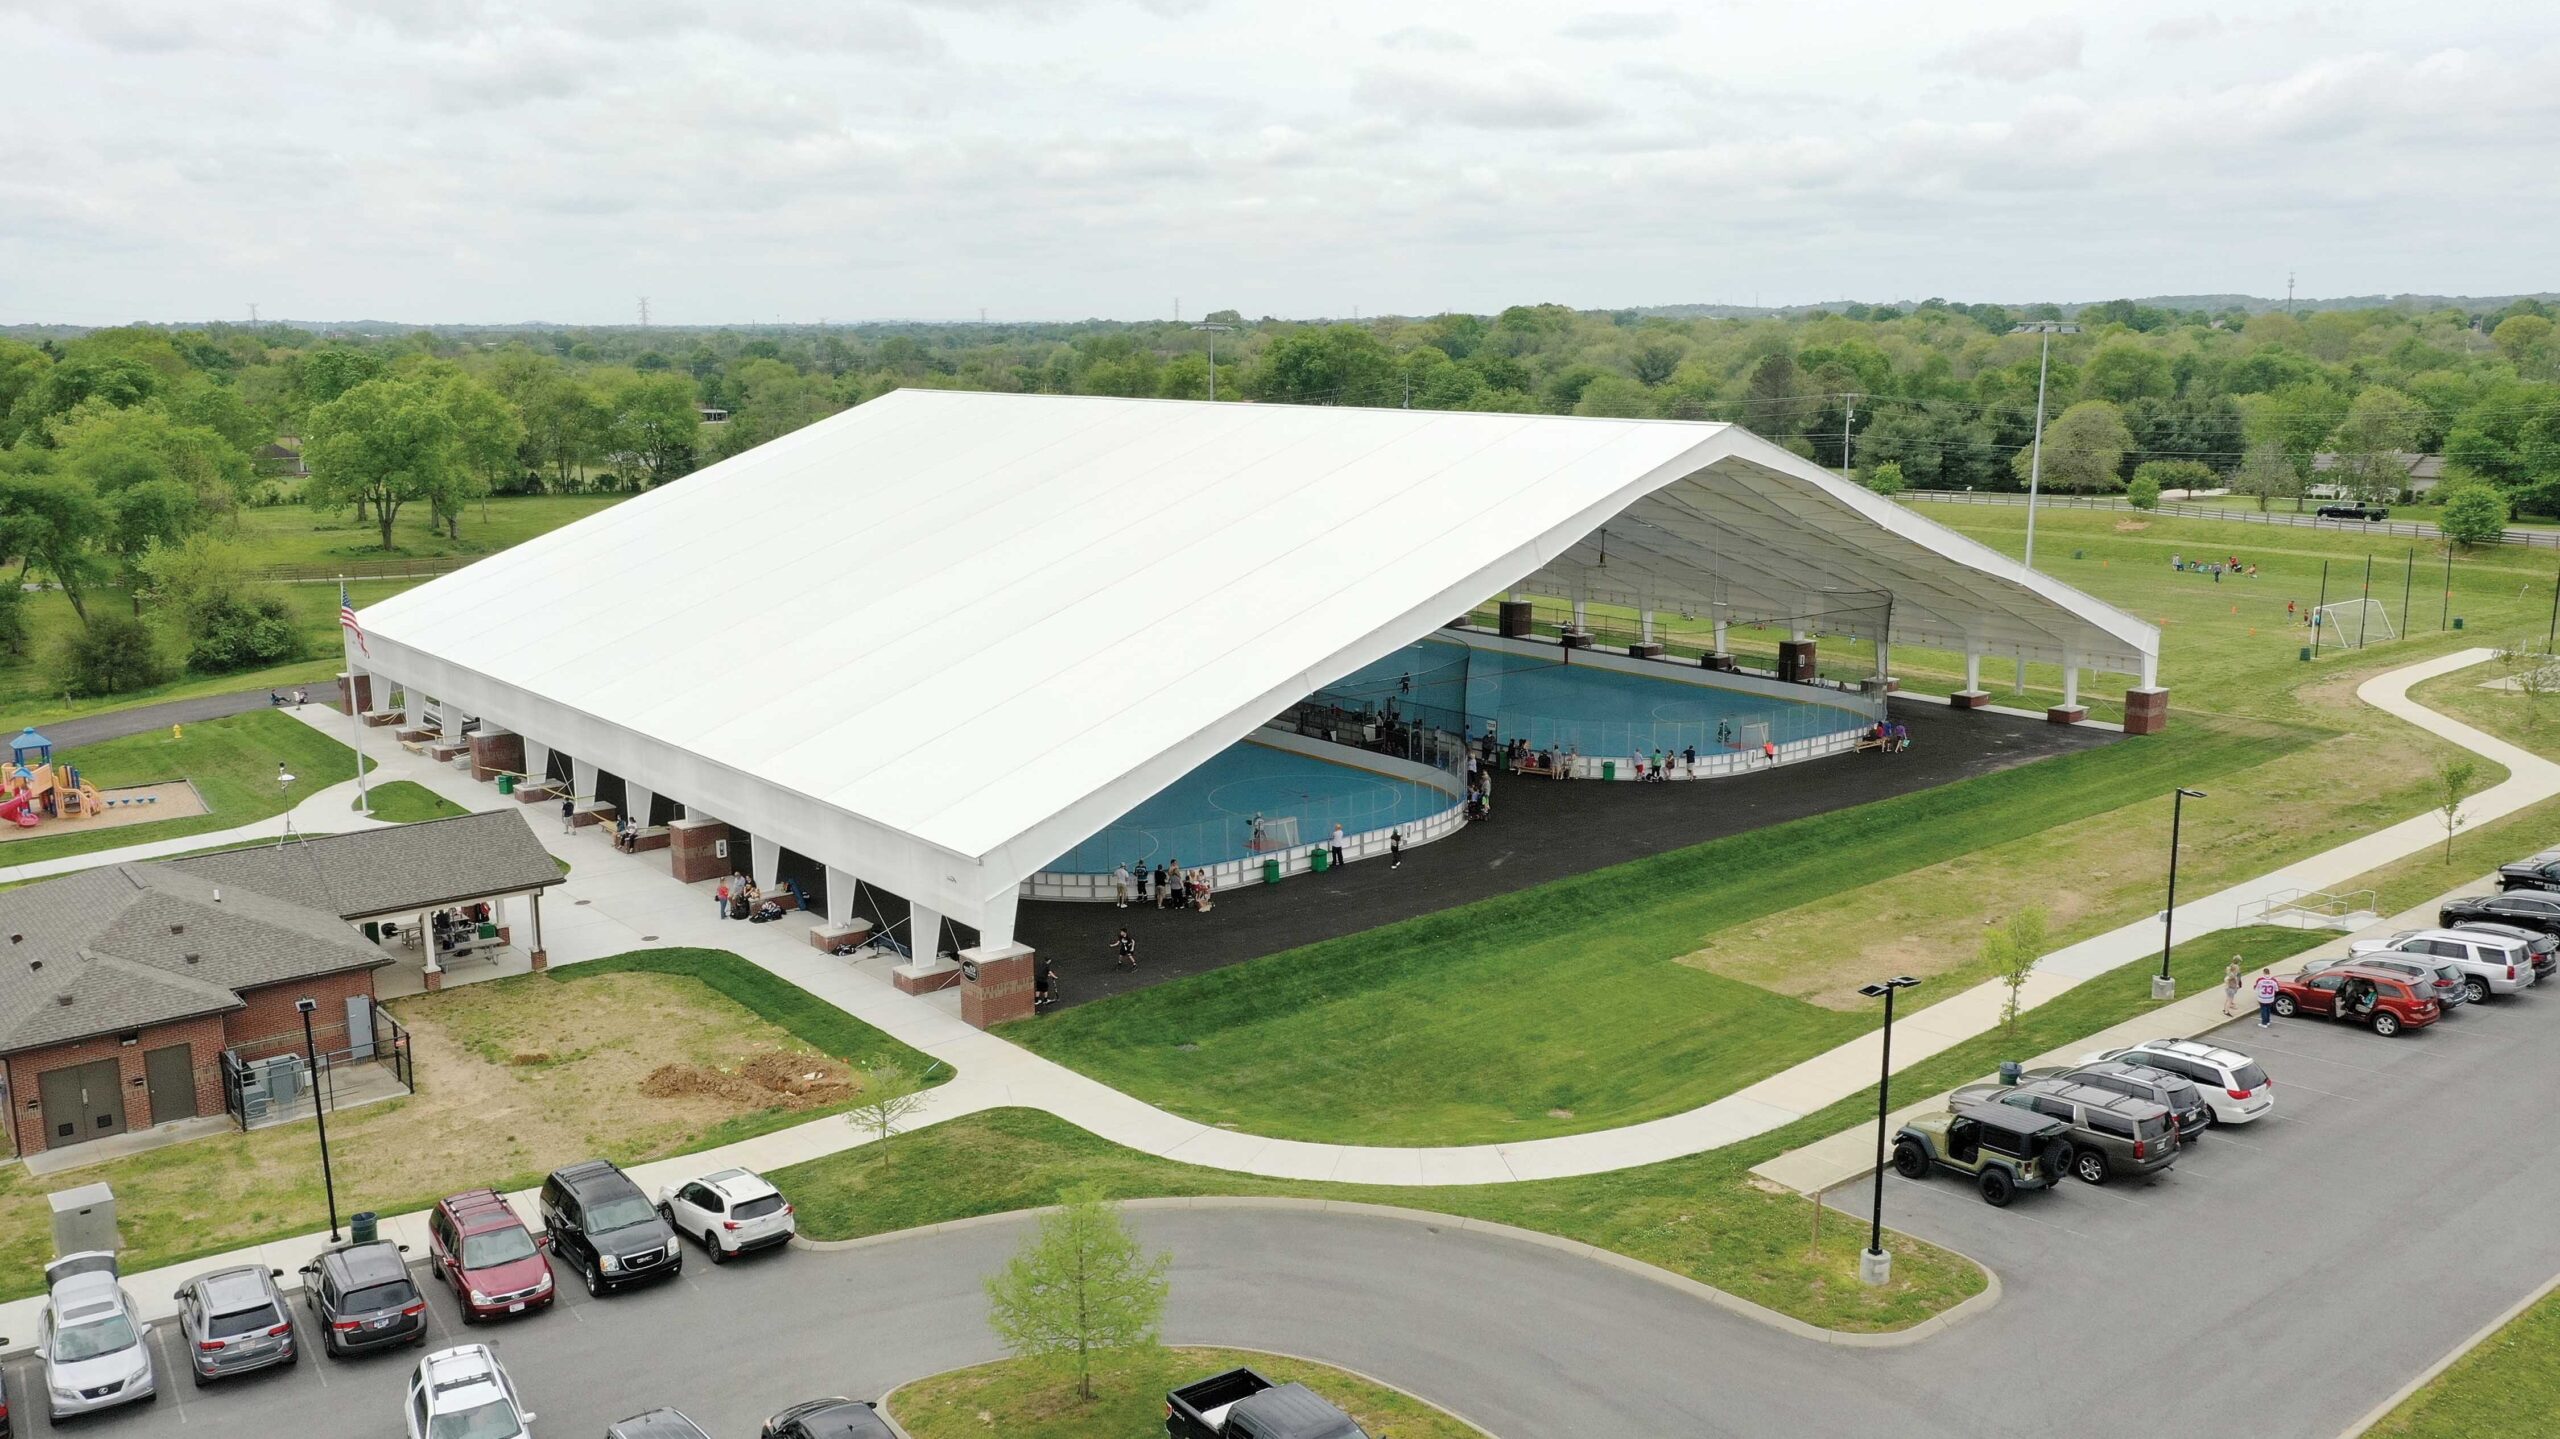 Two inline hockey rinks covered by fabric beam pavilion building